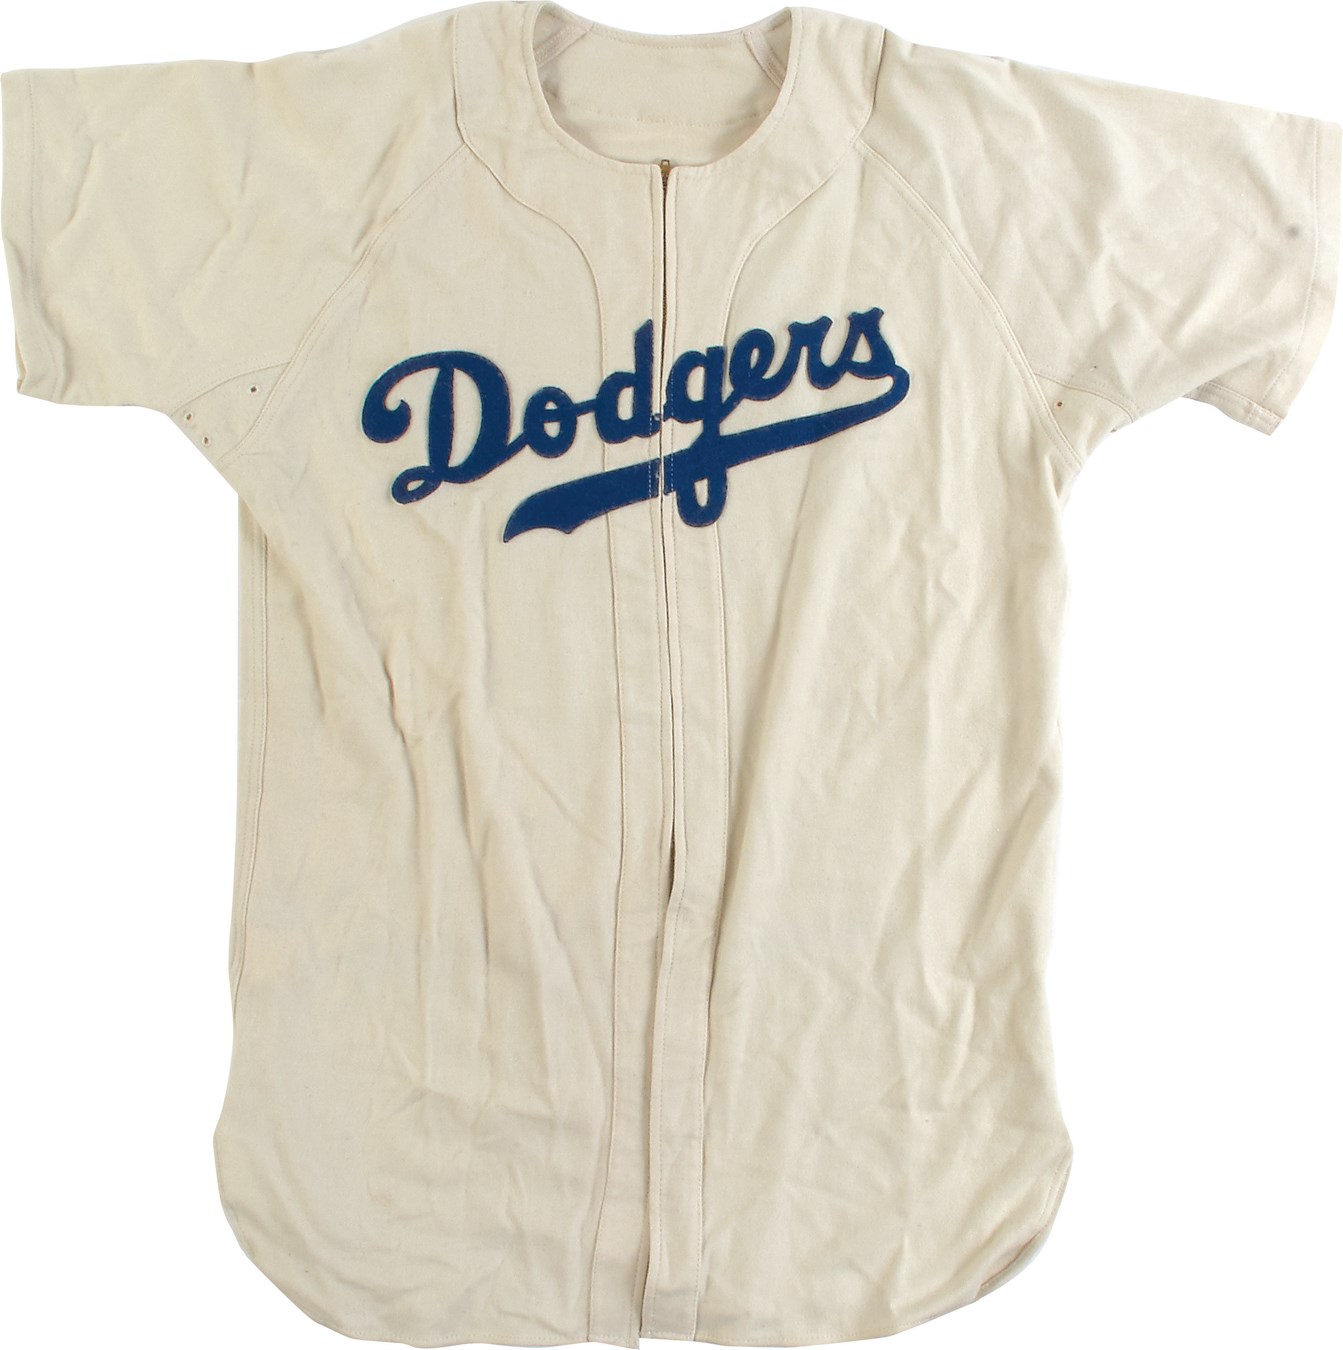 Jackie Robinson "42" (The Movie) Home Jersey Signed by Rachel Robinson